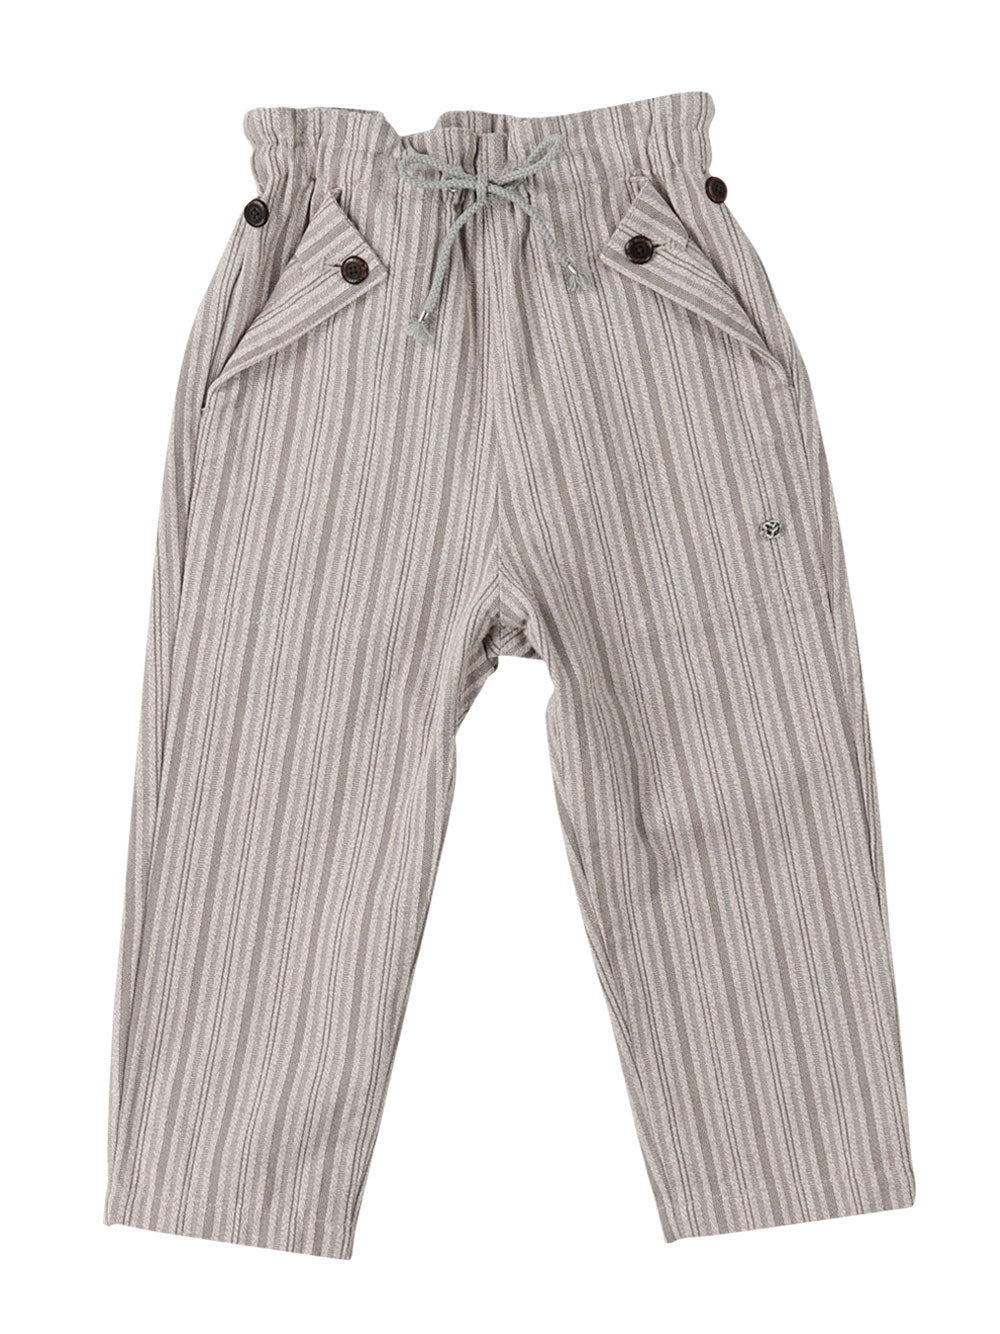 PREORDER: Grey Striped Trousers